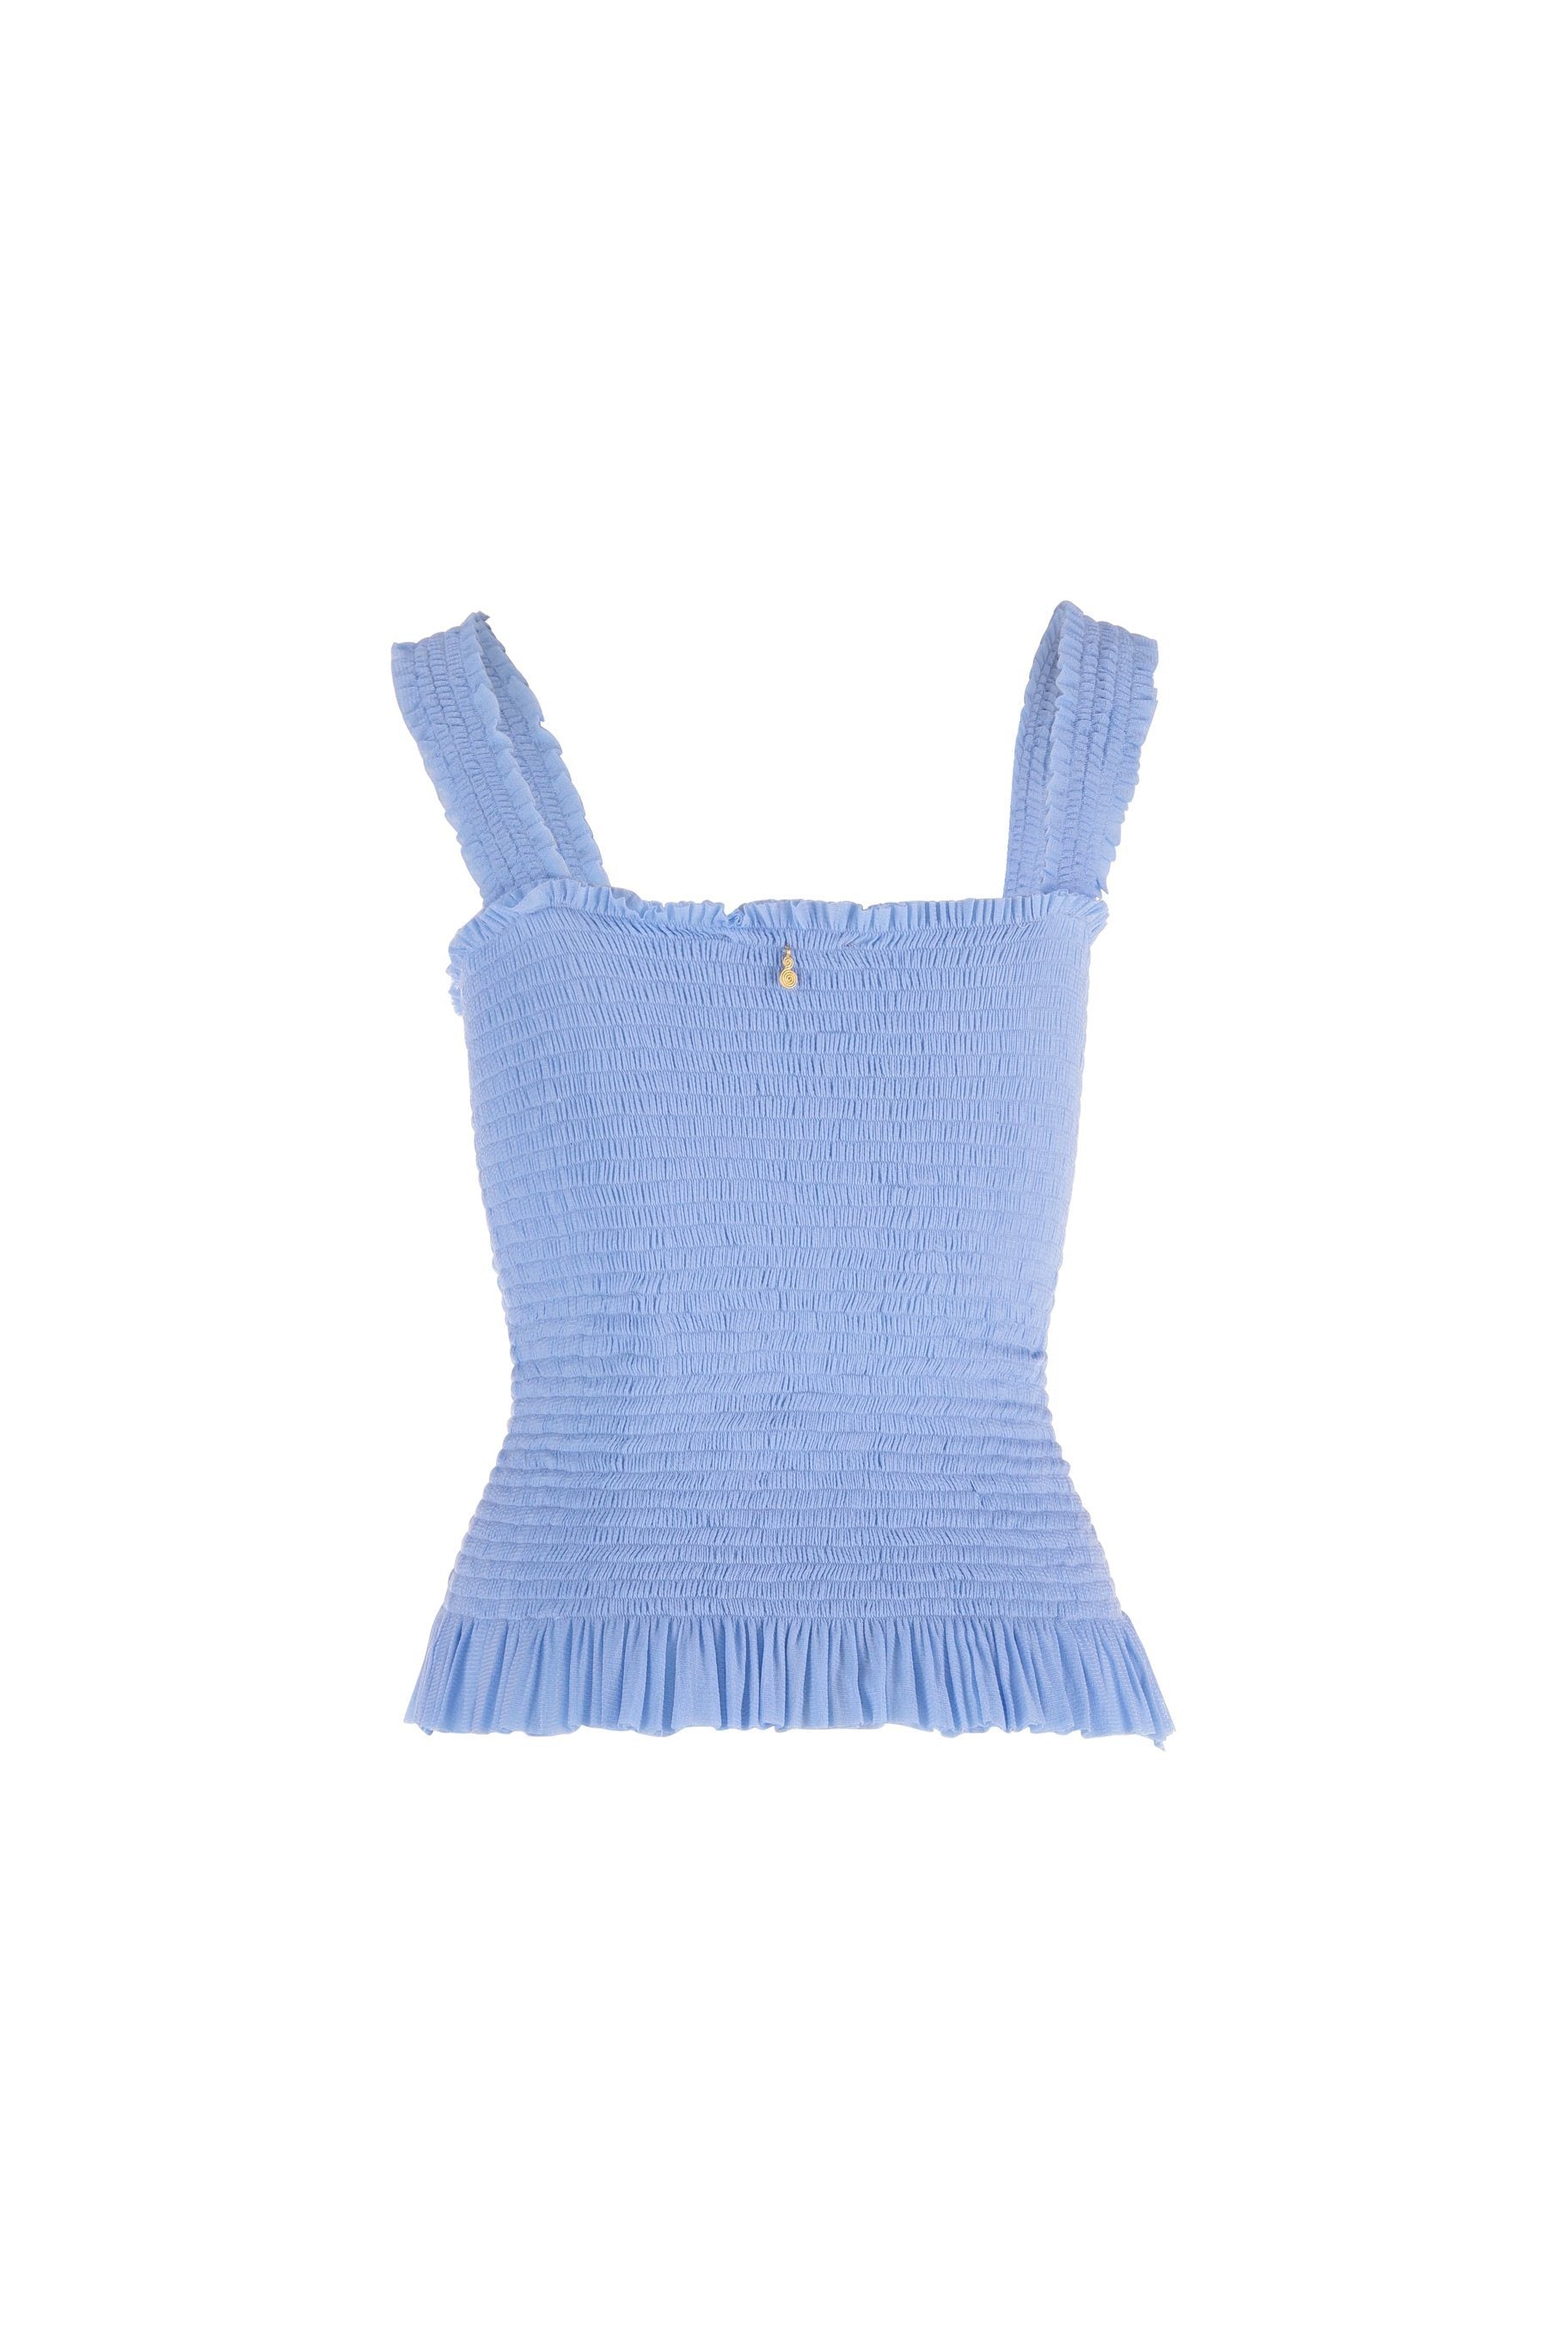 Eugenie Long Top  Blue